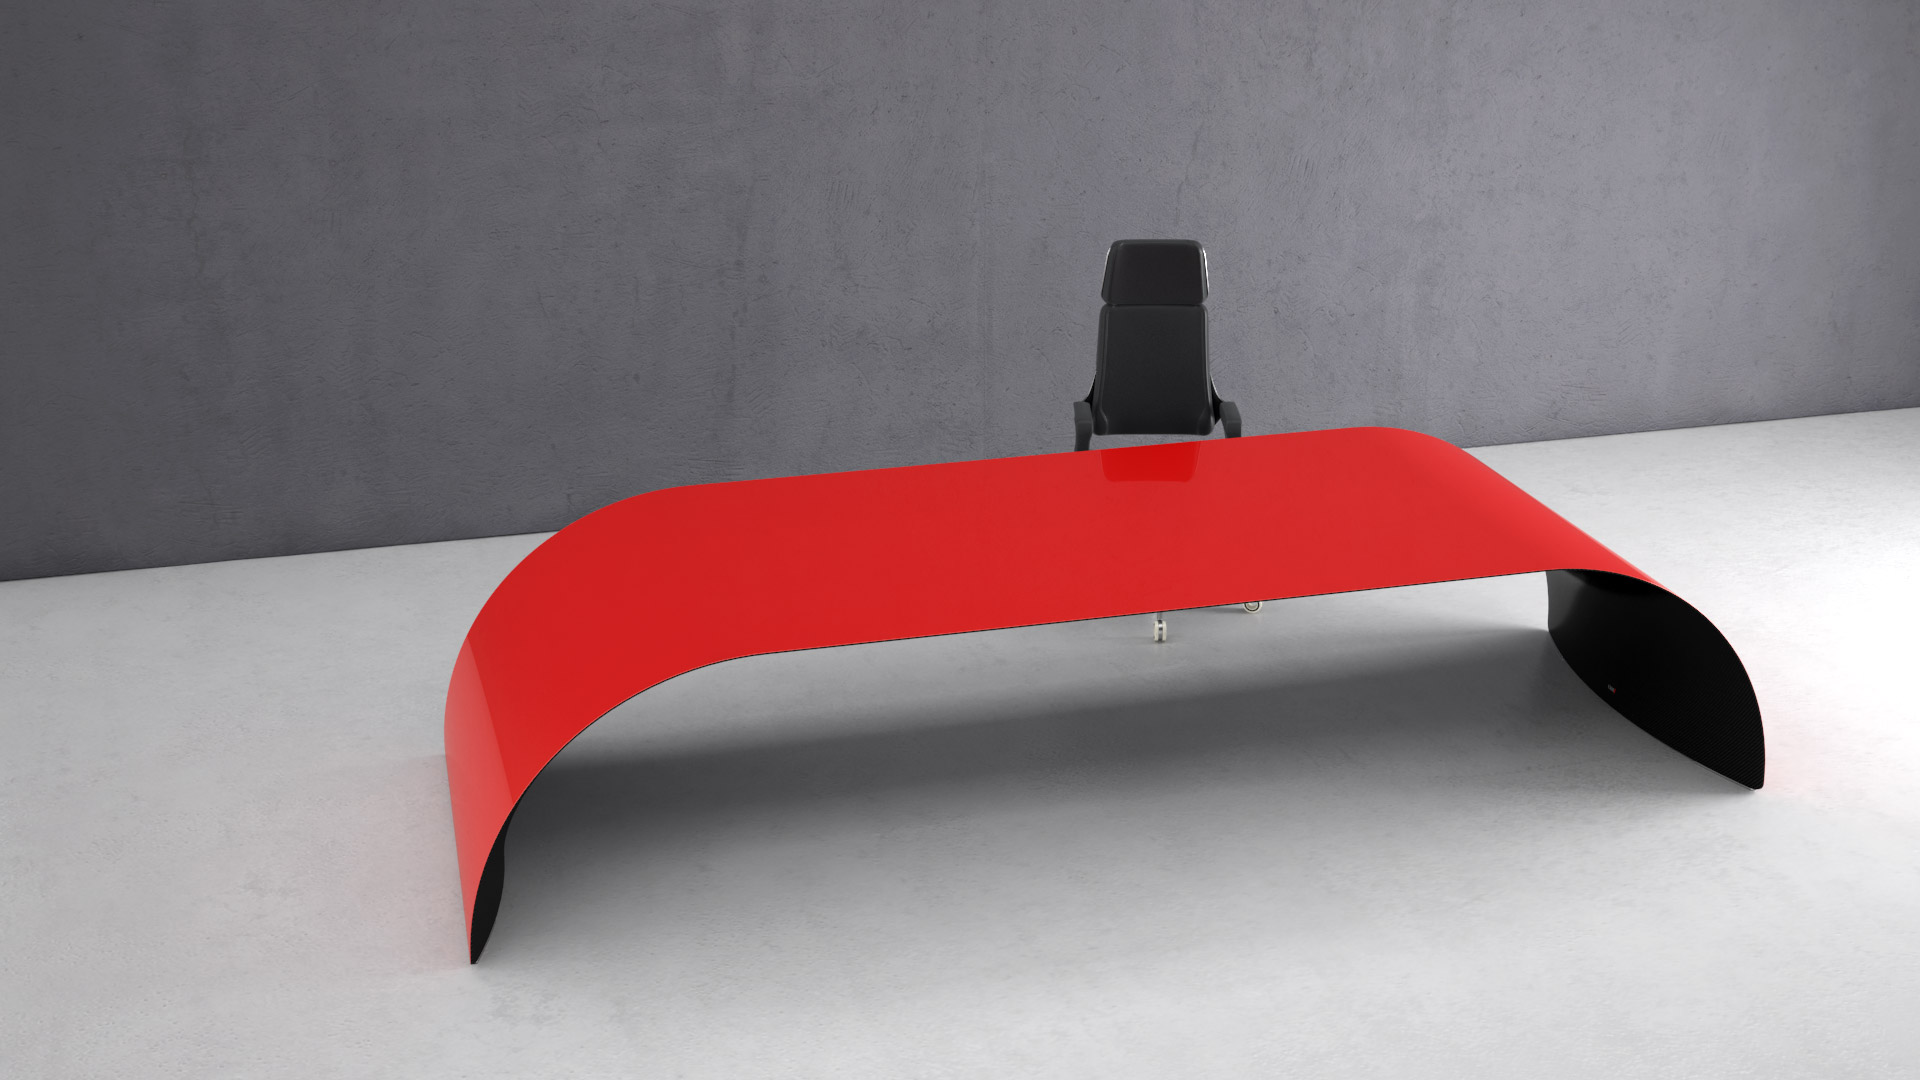 CEO /carbon. Executive desk made of carbon fiber, Kevlar and stainless steel. Painted glossy red on top, transparent glossy on the bottom side.